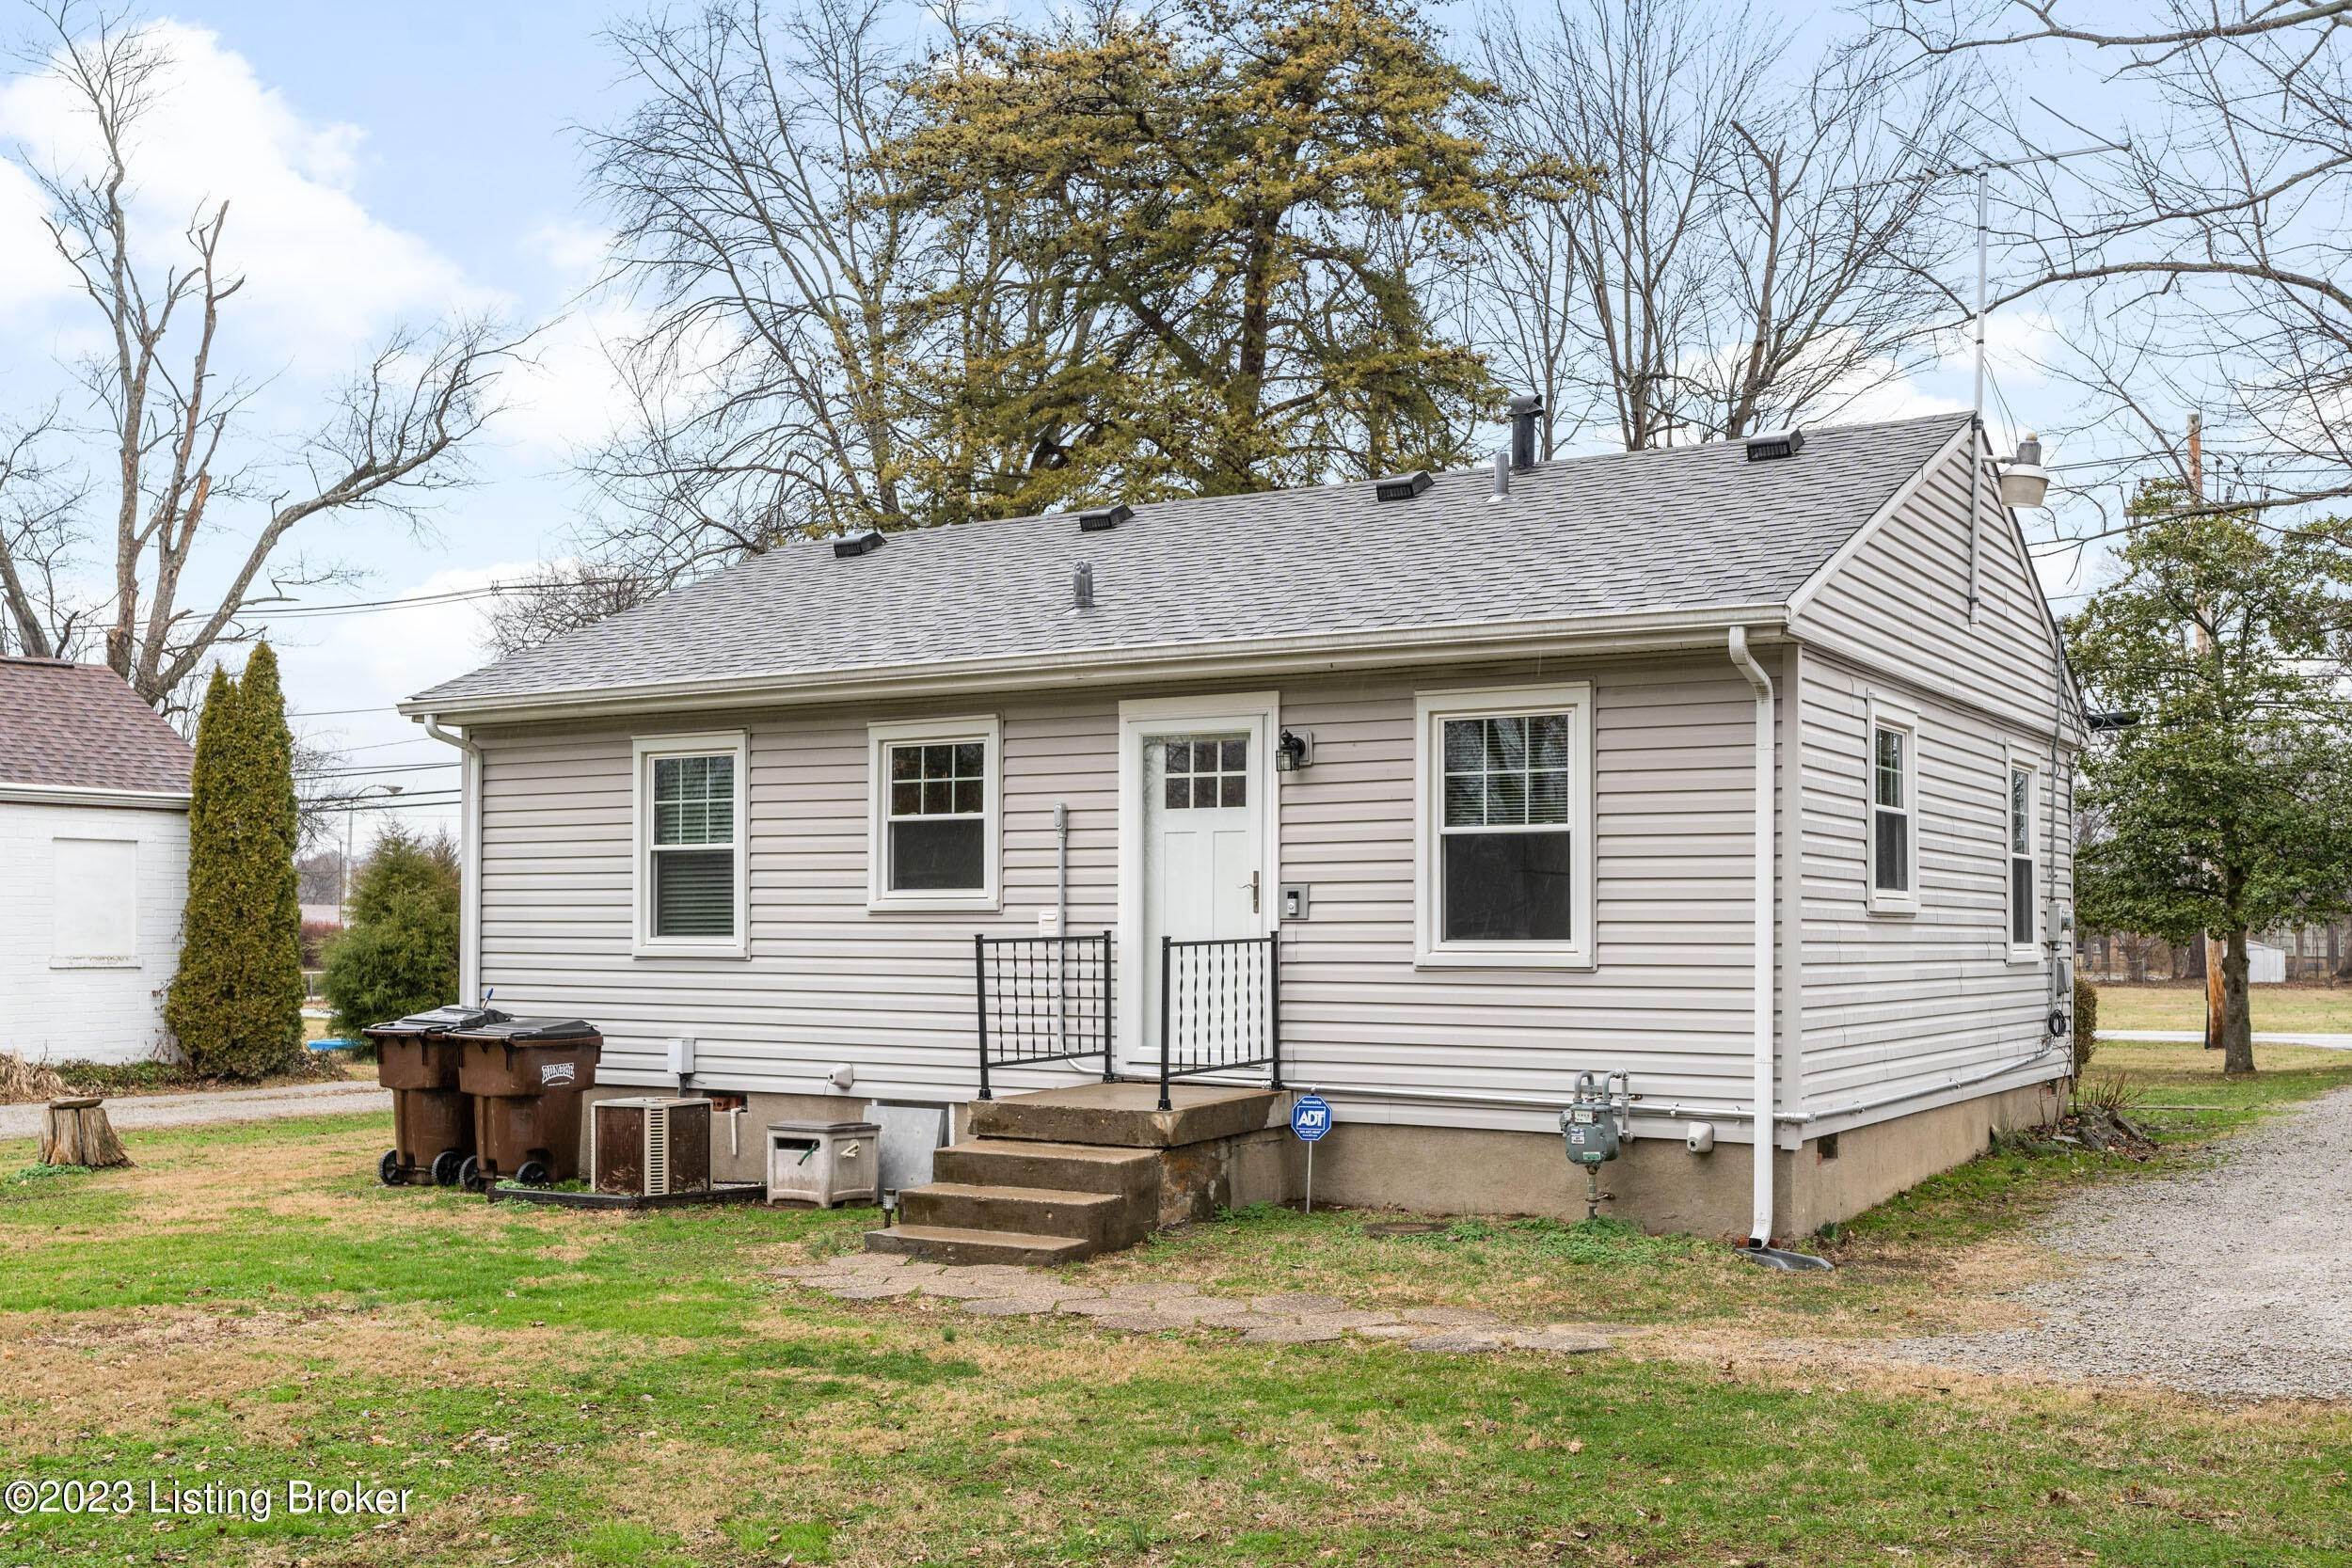 28. Single Family at Louisville, KY 40291